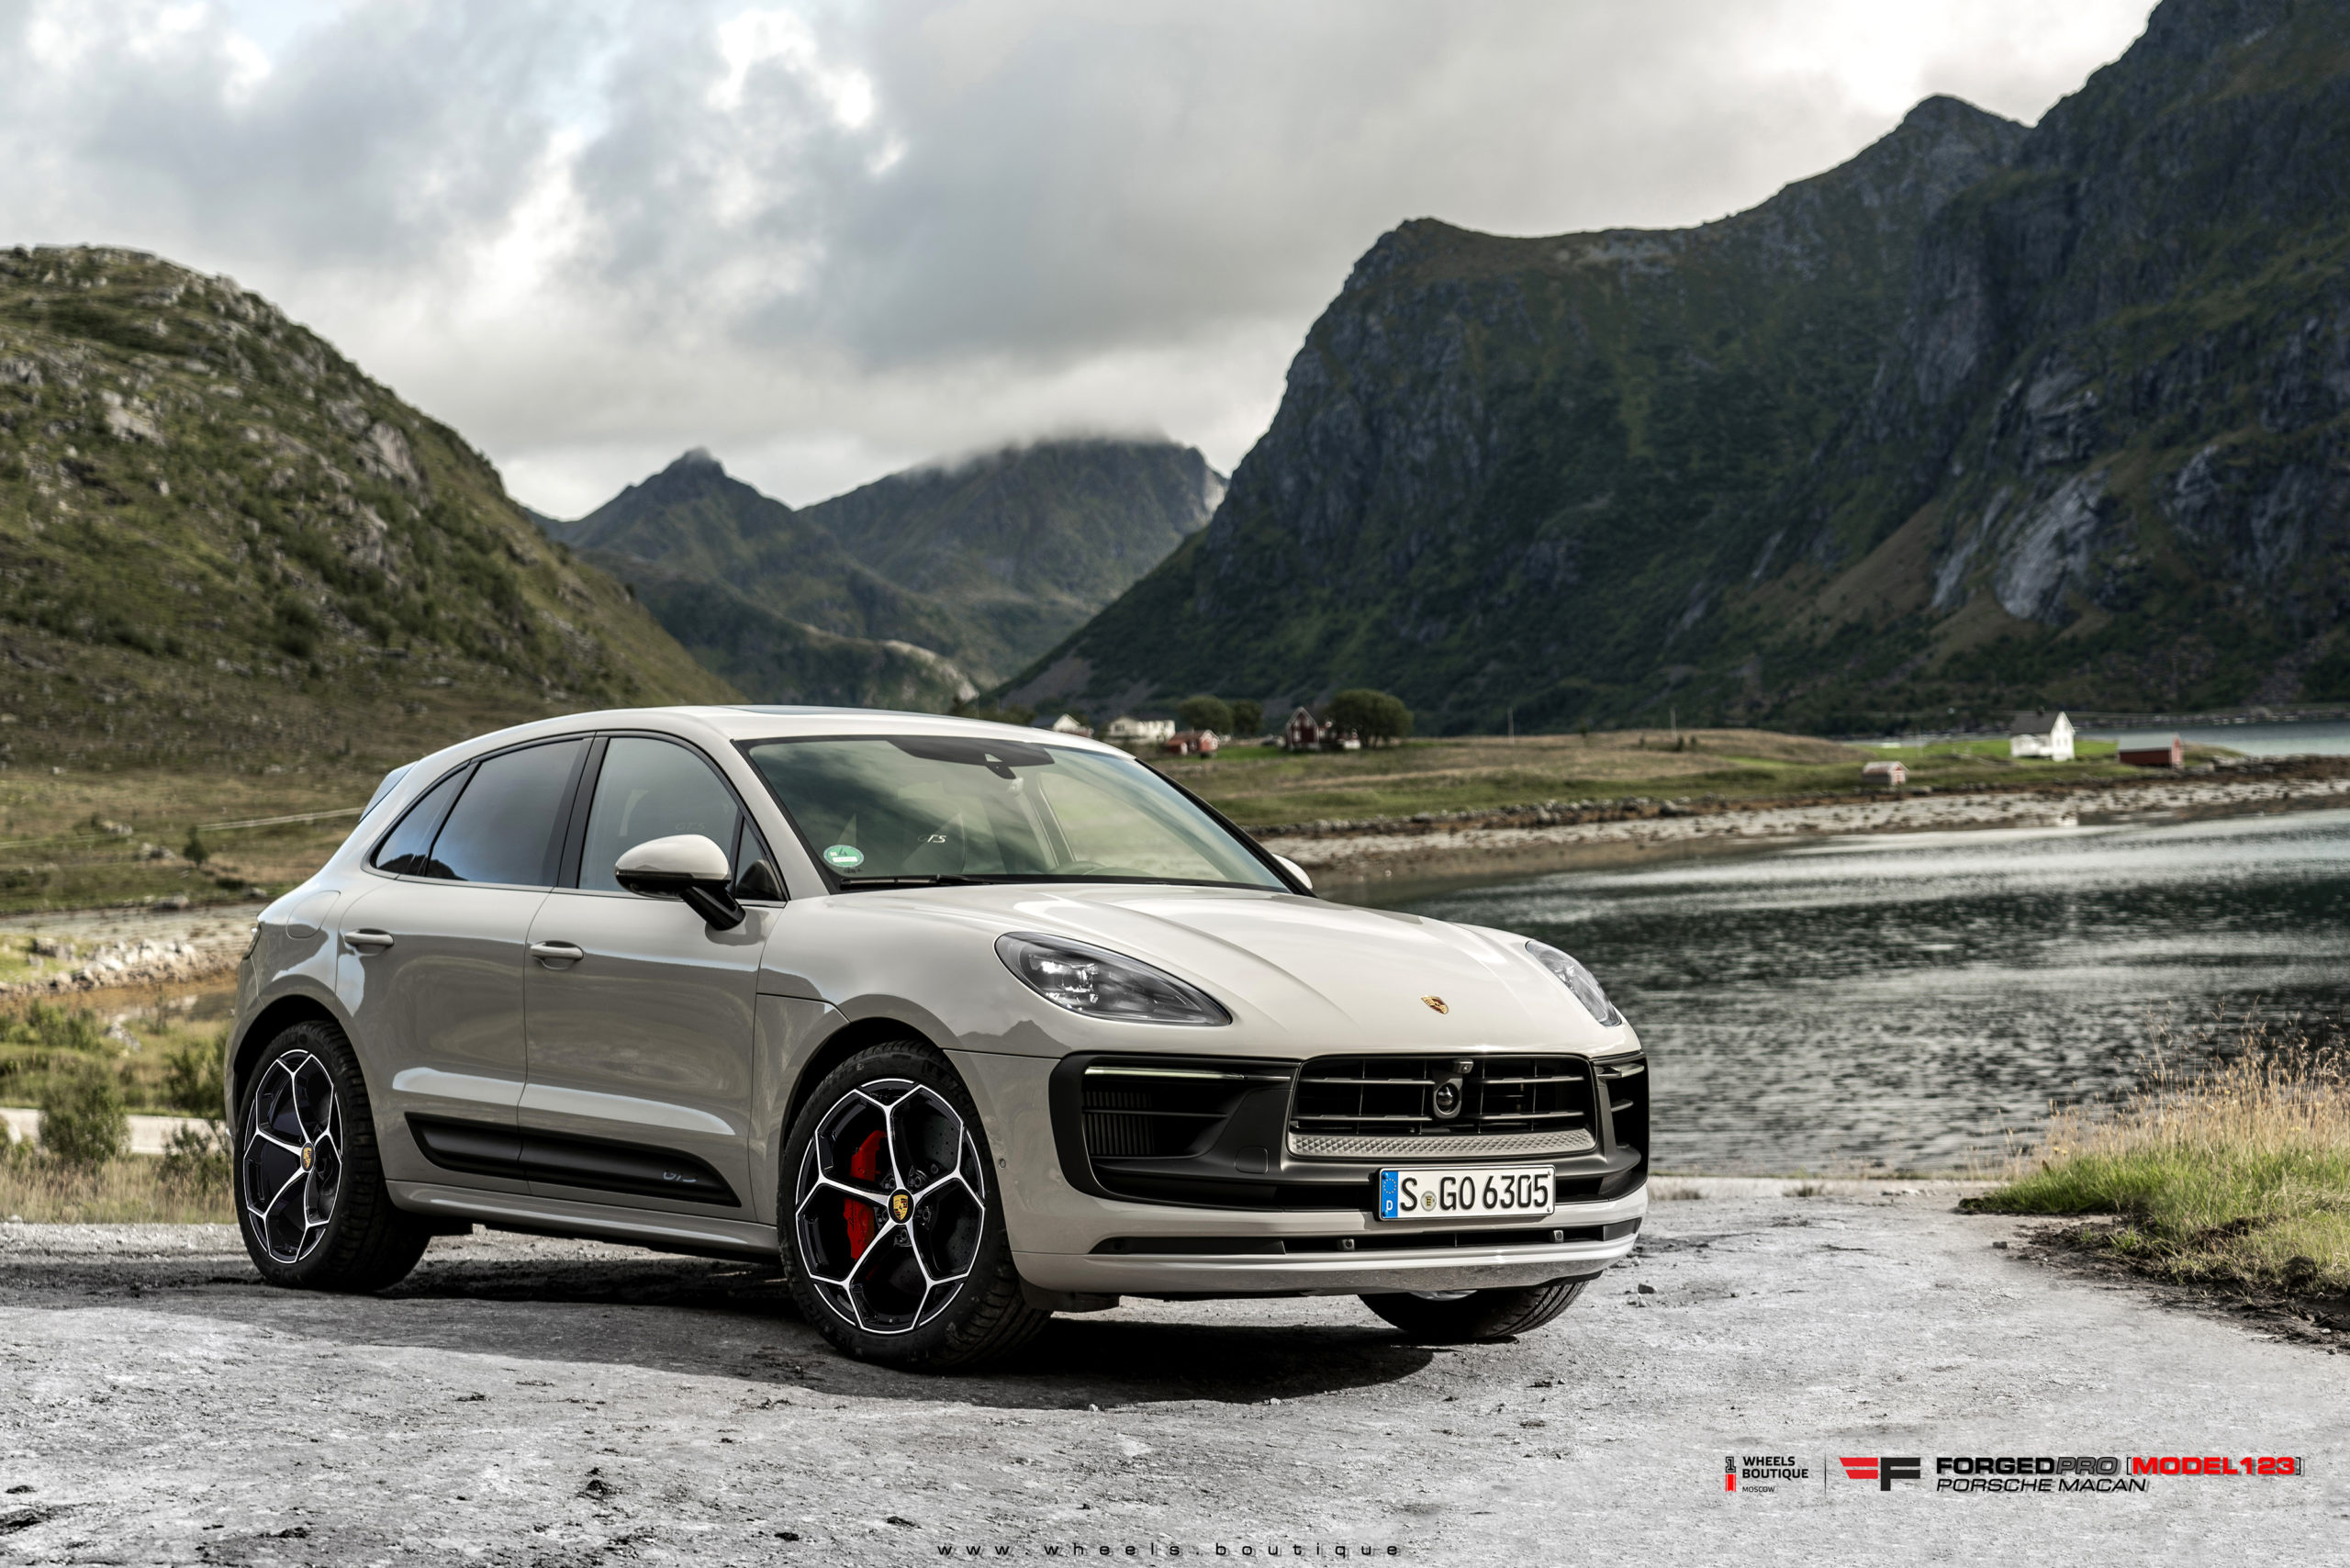 Porsche Macan Forged PRO FP-59 Conf